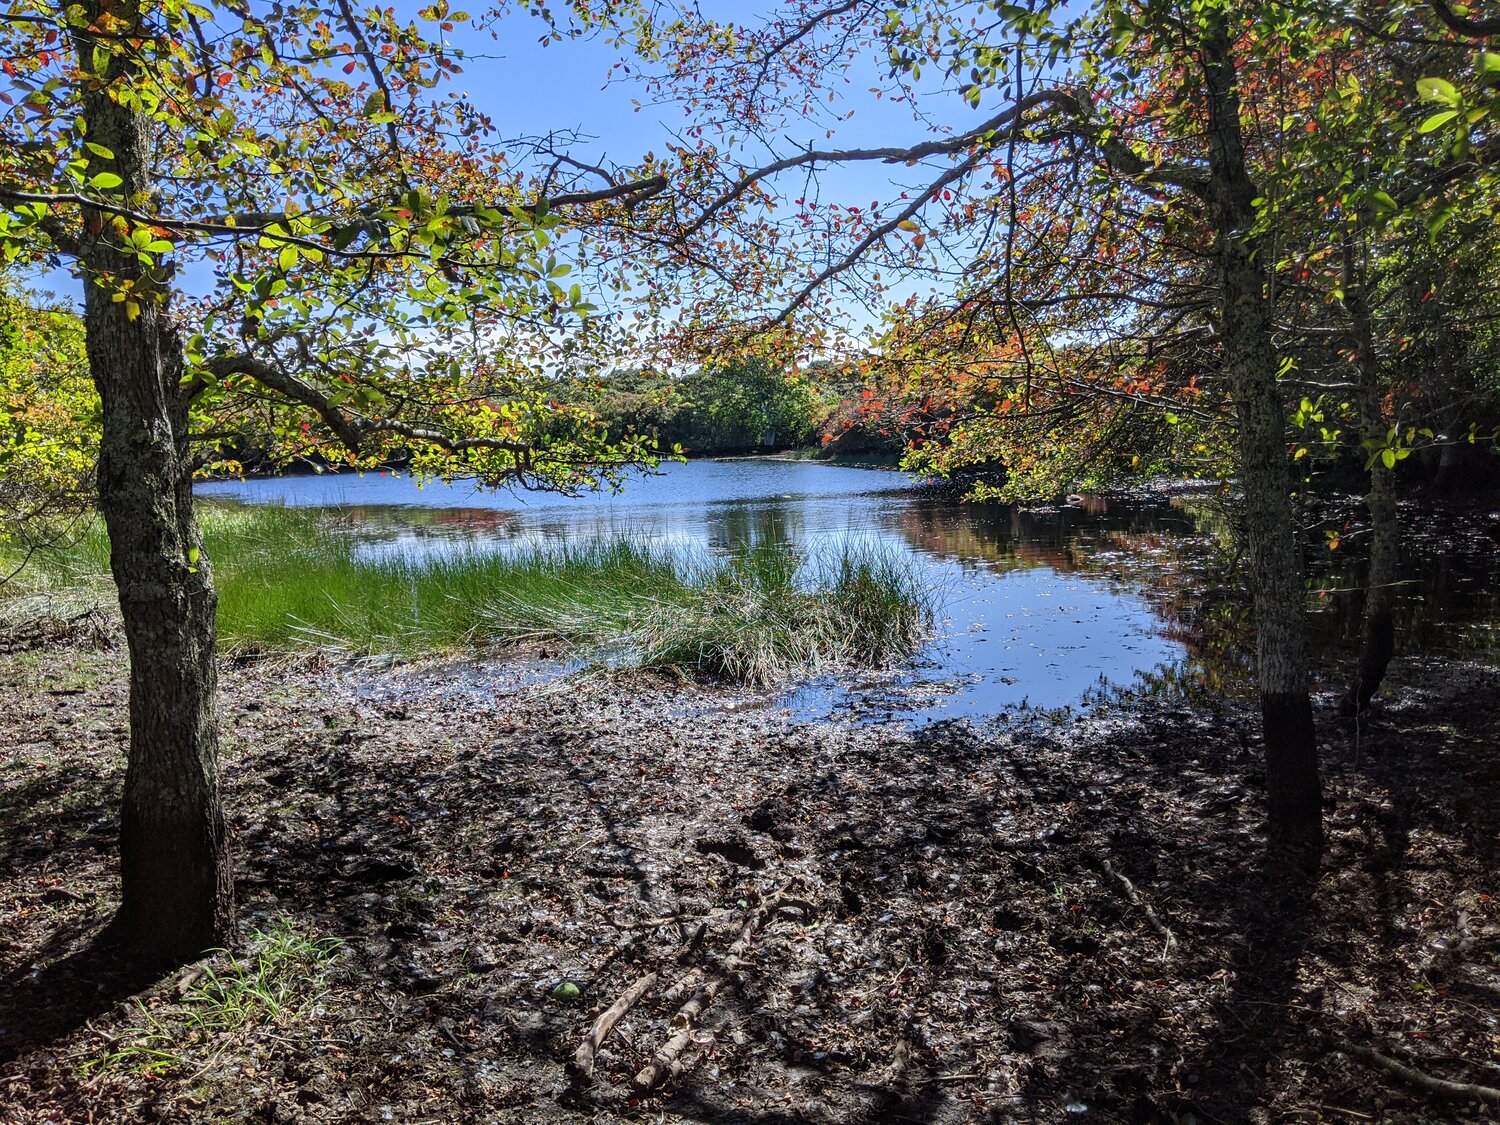 Almanack Pond is along the trail to Folger’s Hill, the second highest point on the island after only the Sankaty Bluff.